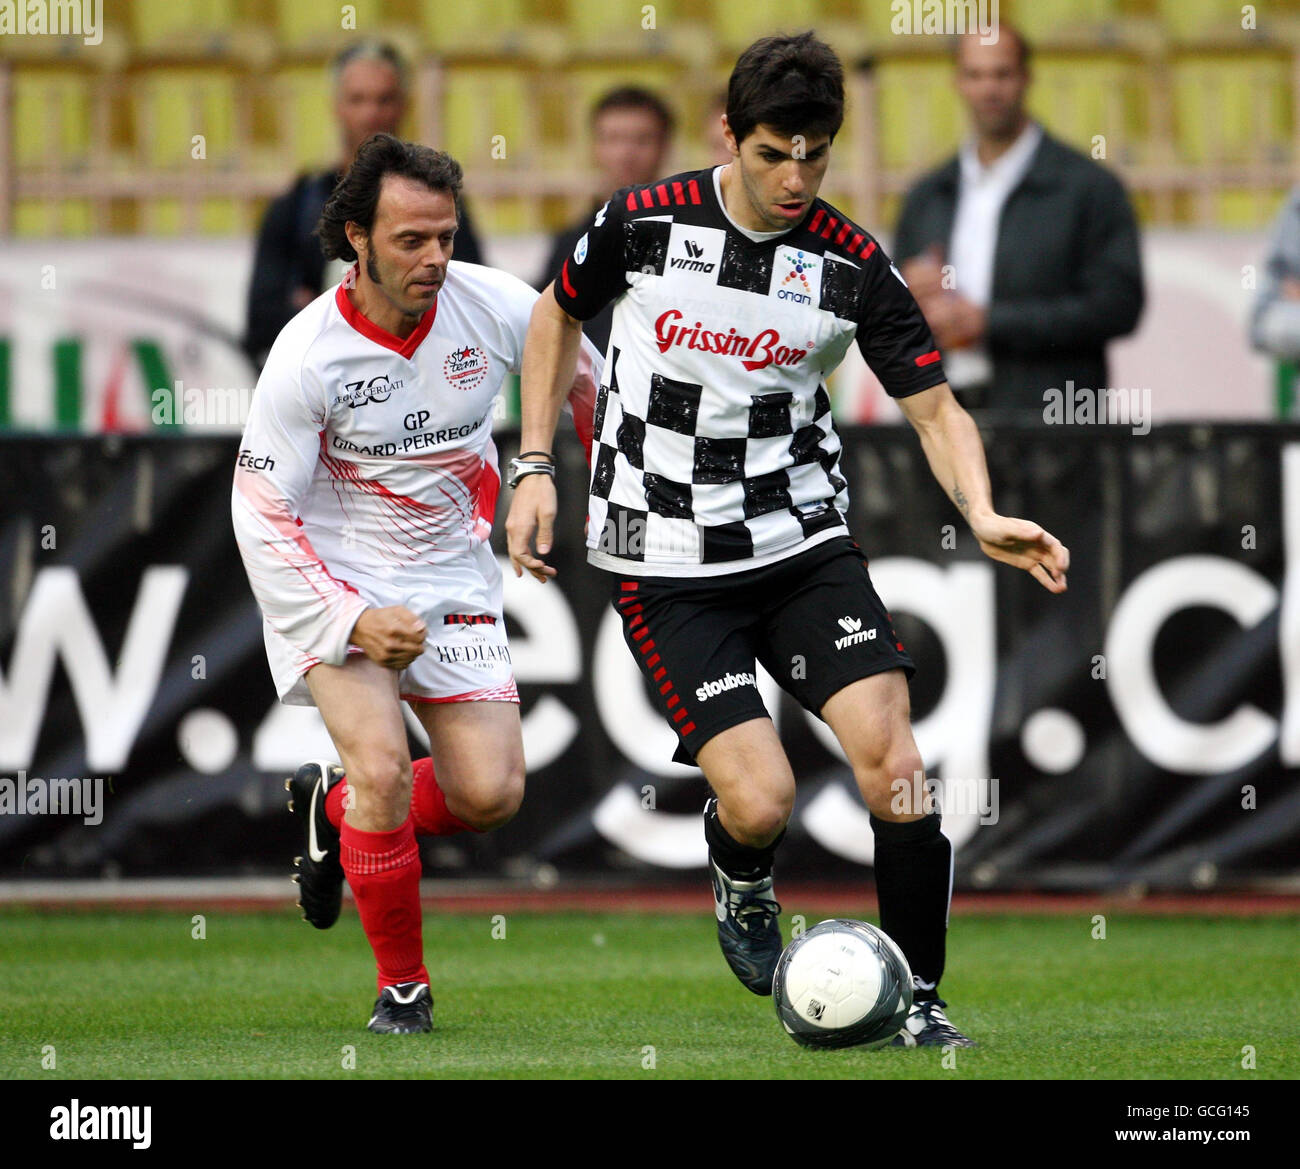 Soccer - Charity Match - Celebrity v Formula One Drivers - Stade Louis II. Jaime Alguersuari (right) in action during the Celebrity Charity Football match at Stade Louis II, Monaco. Stock Photo